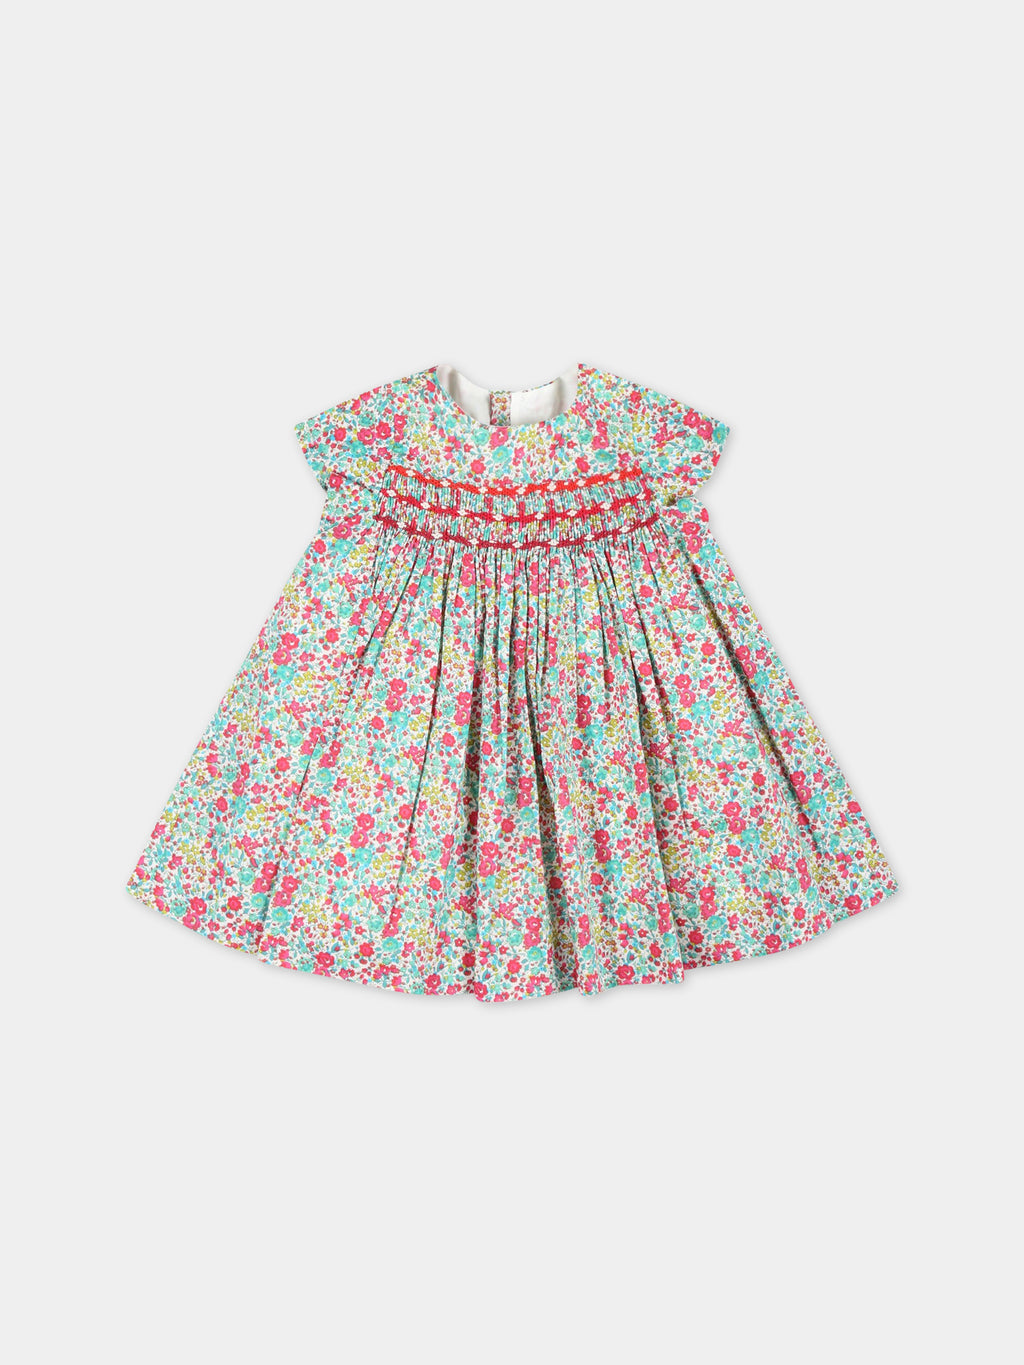 Multicolor dress for baby girl with Liberty print